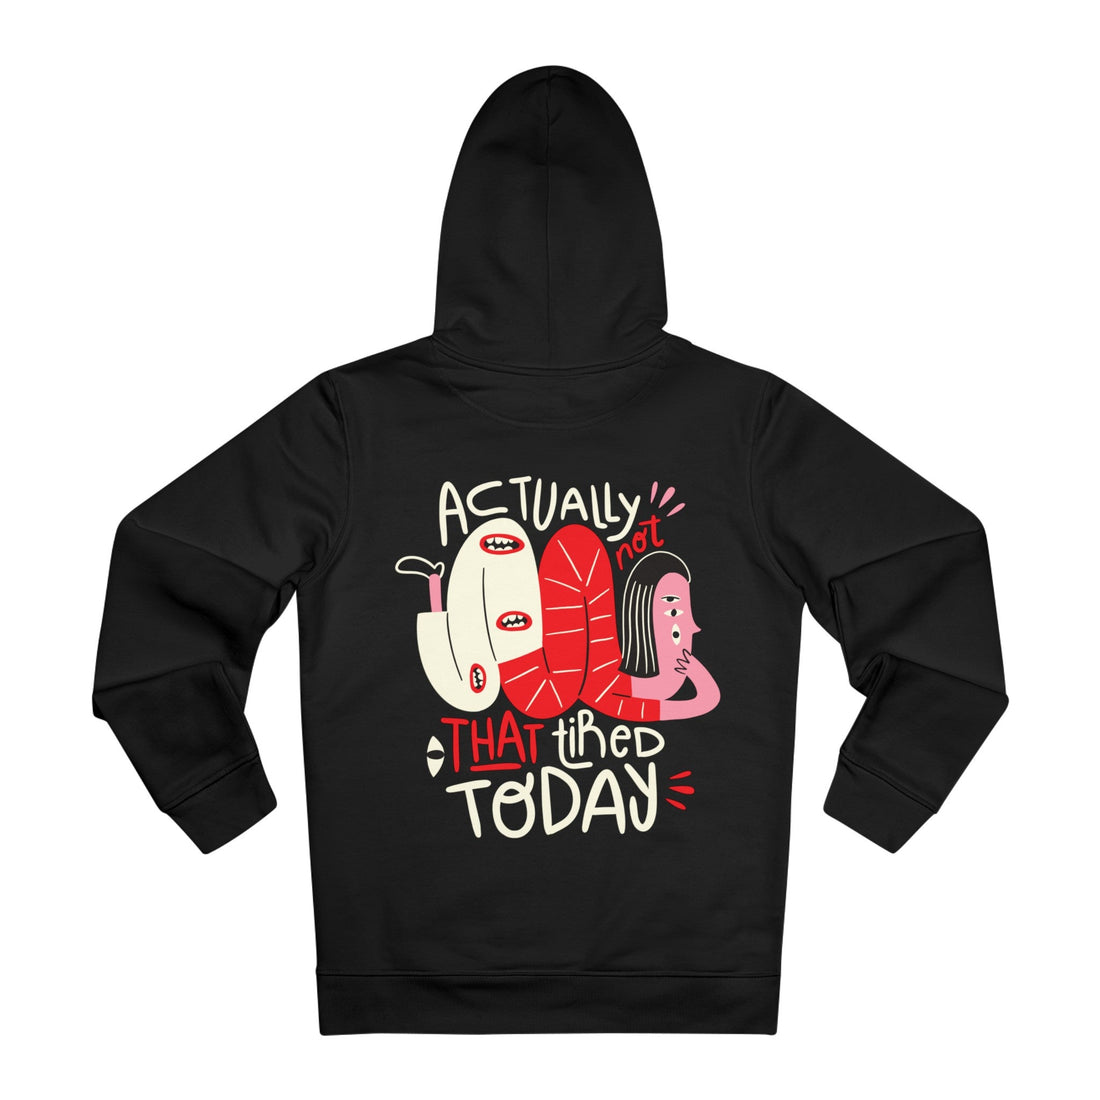 Printify Hoodie Black / M Actually not that tired Today - Weird Characters with Positive Quotes - Hoodie - Back Design